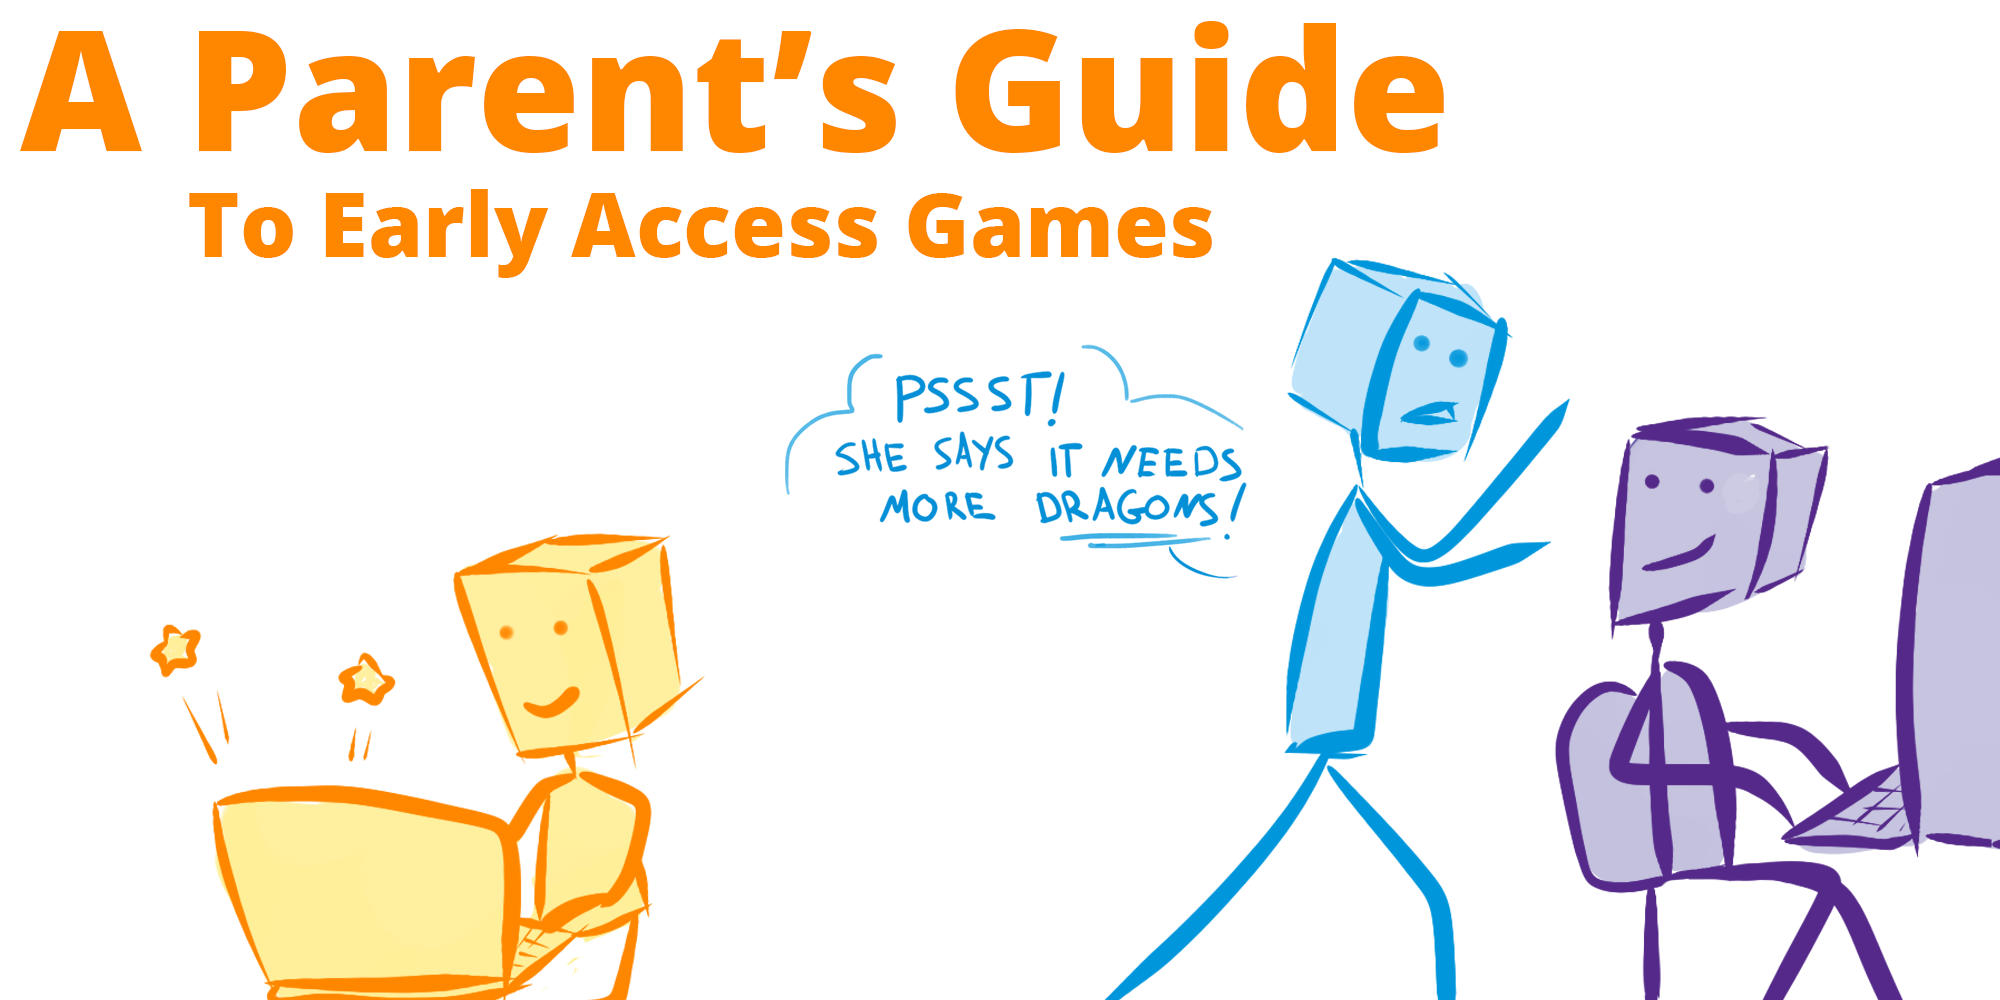 A Parent’s Guide To Early Access Games